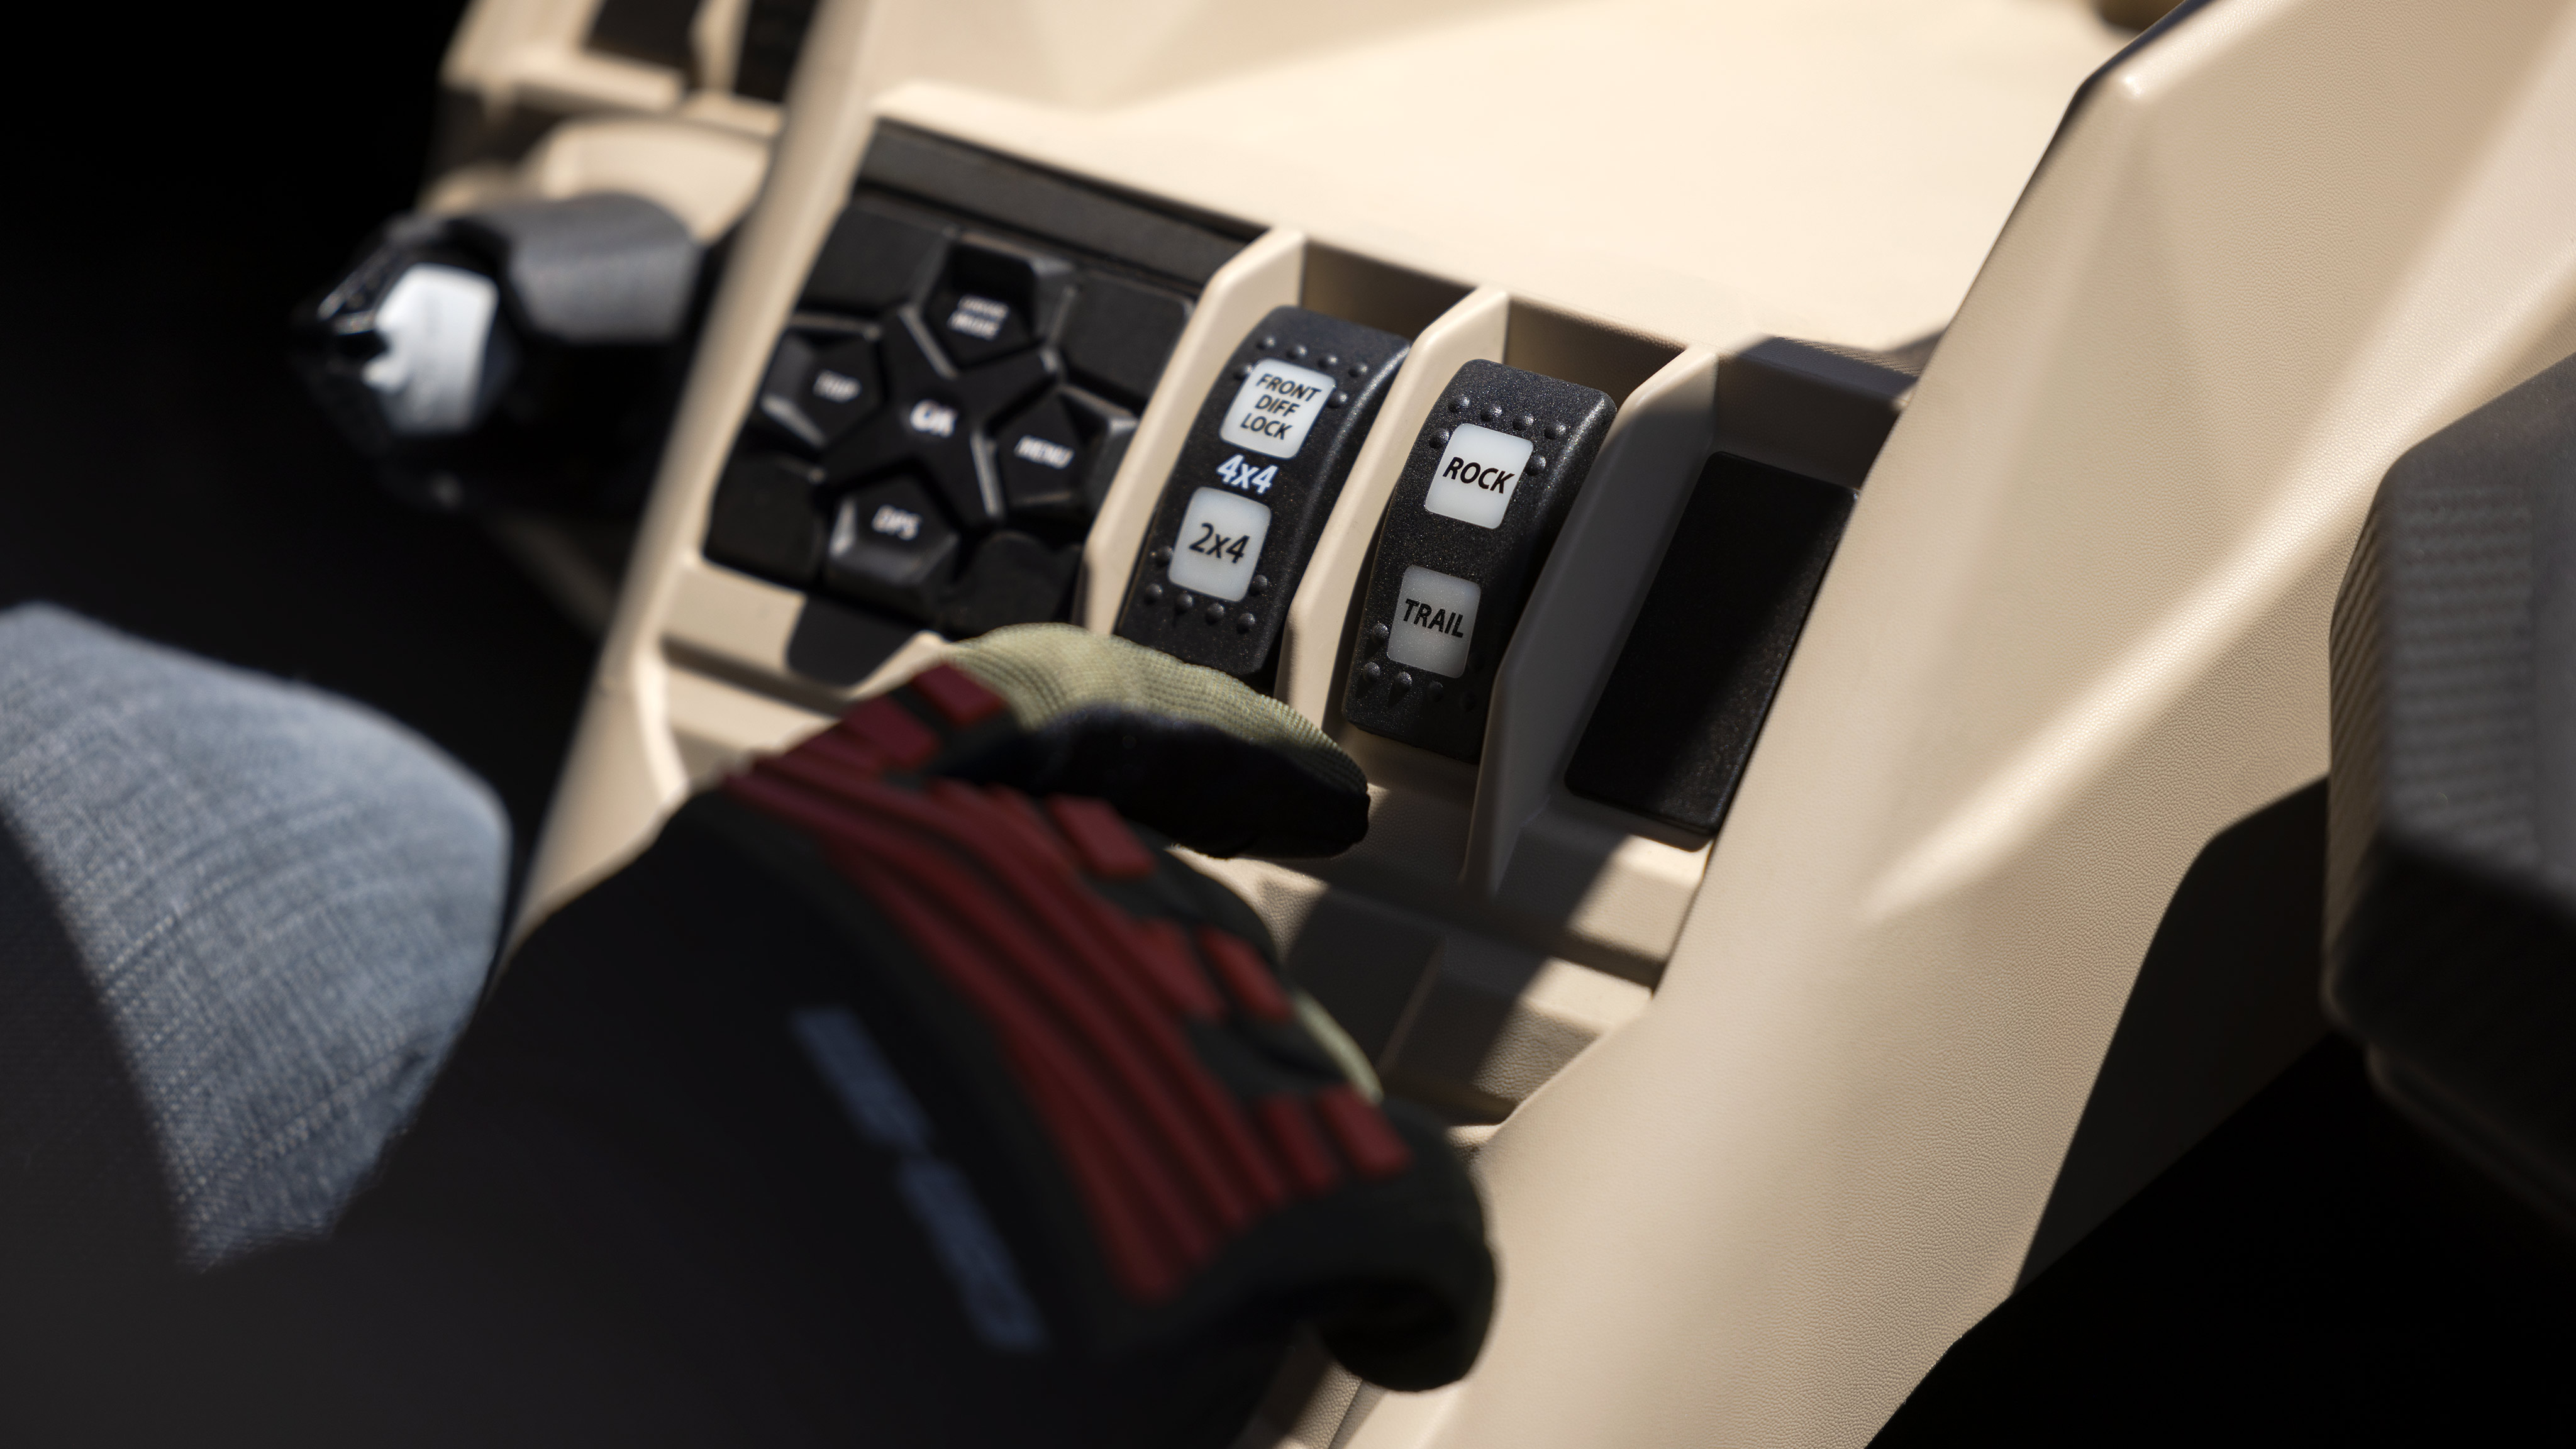 Using controls on Can-Am vehicle console